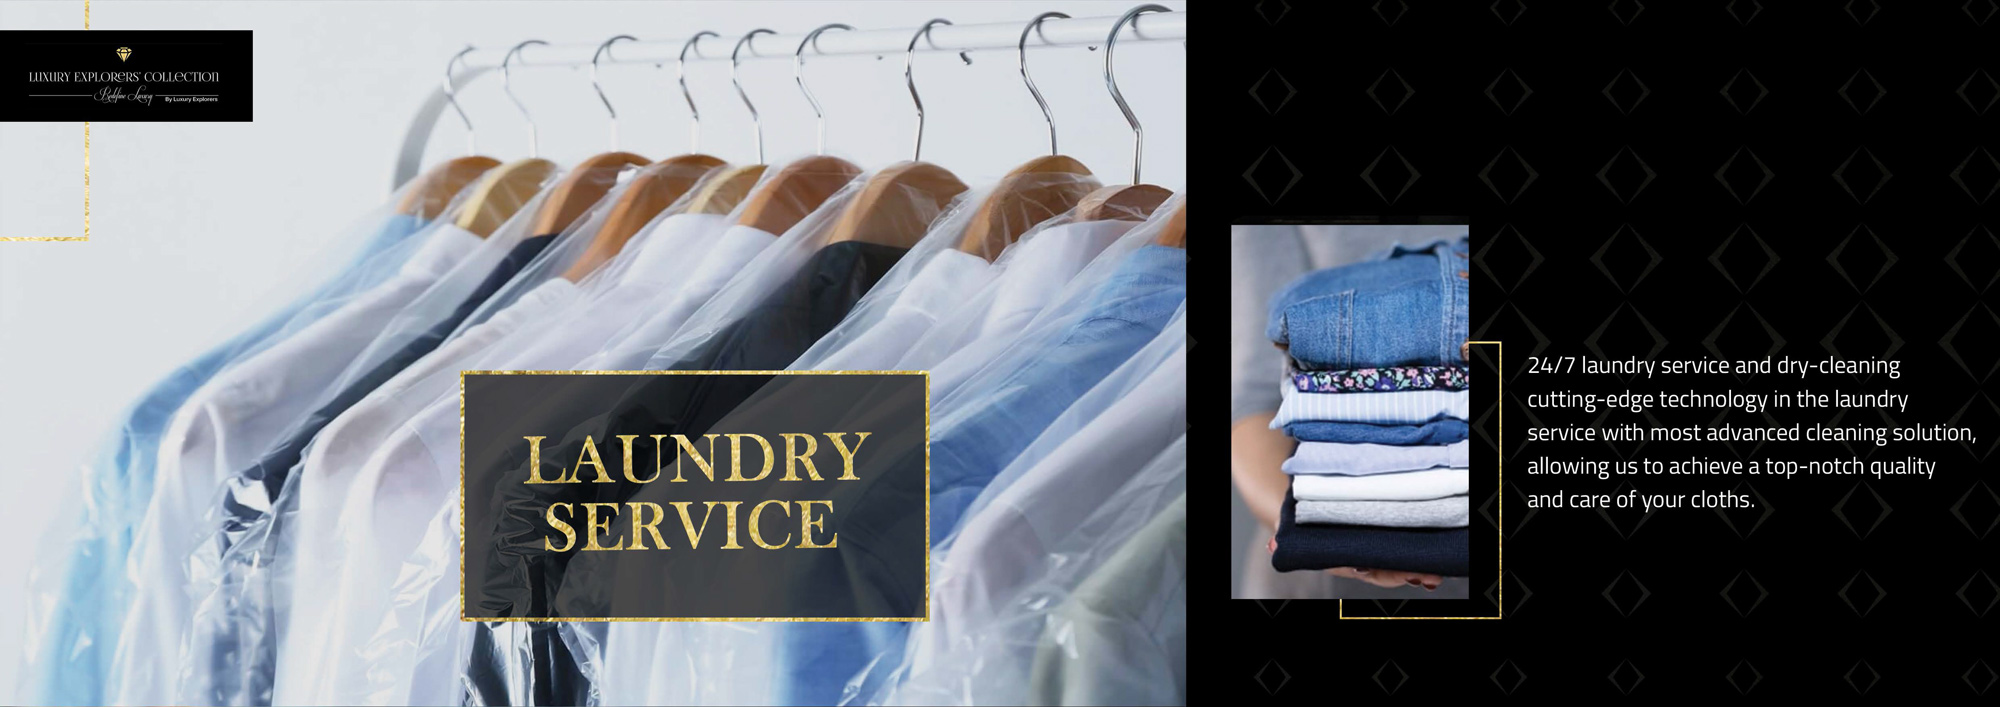 Laundry-Services